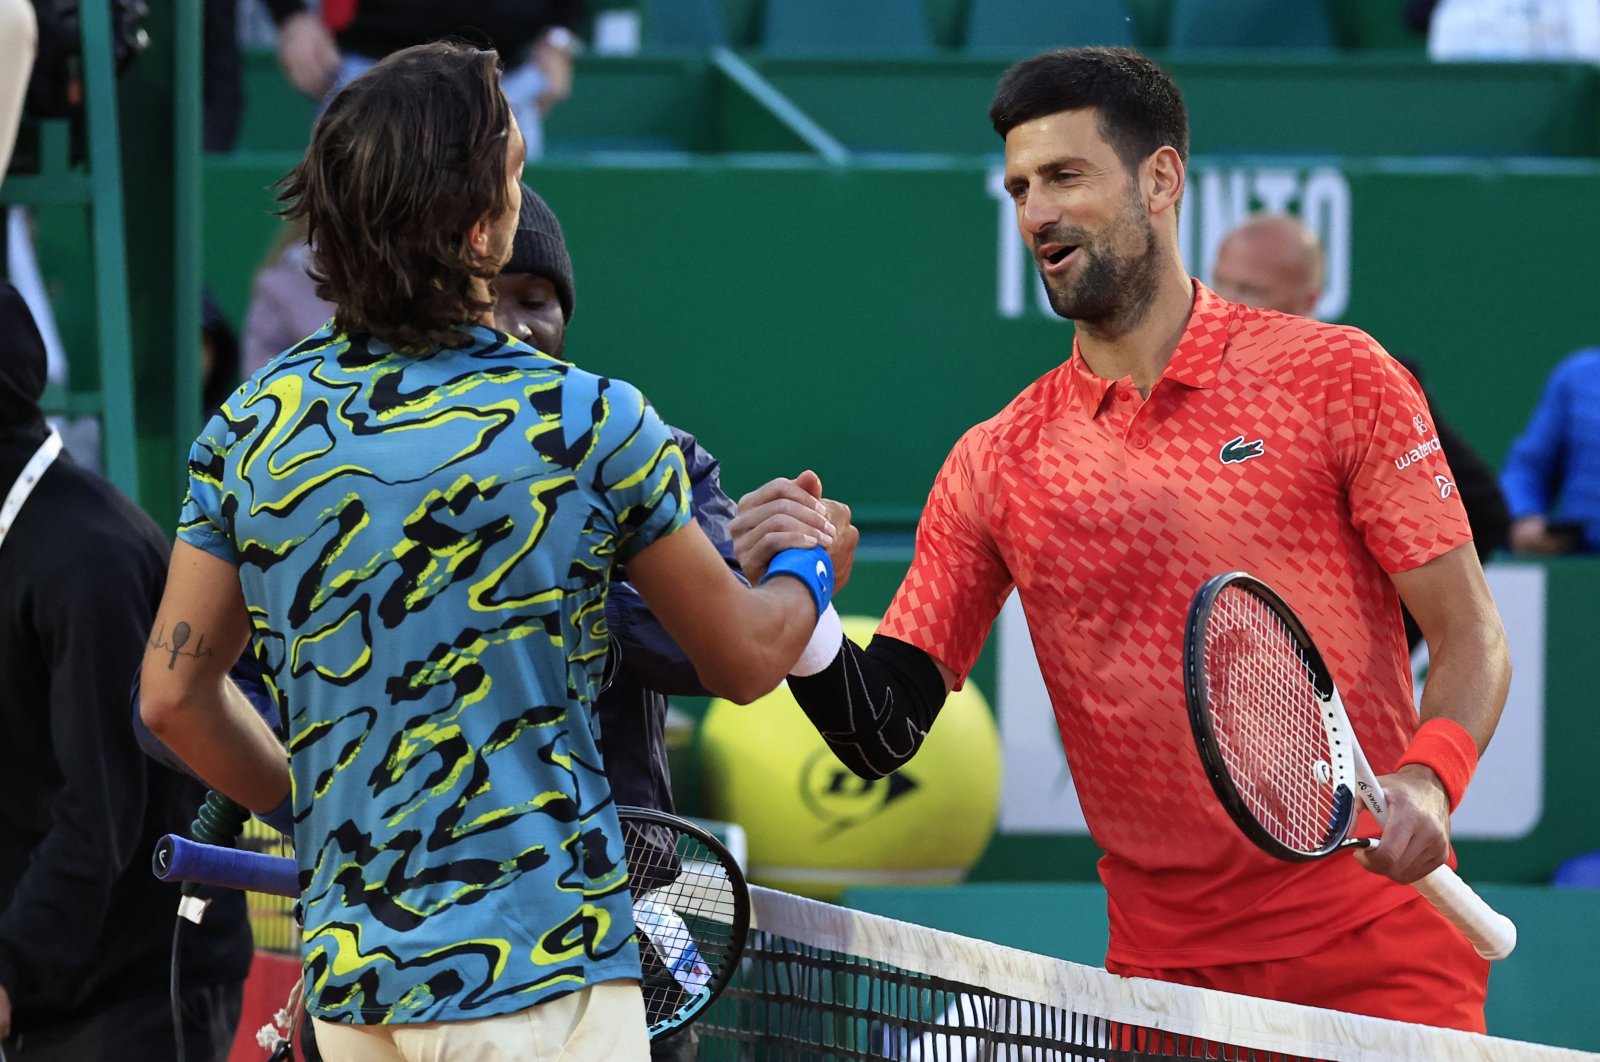 Novak Djokovic sent to another early exit at Monte Carlo